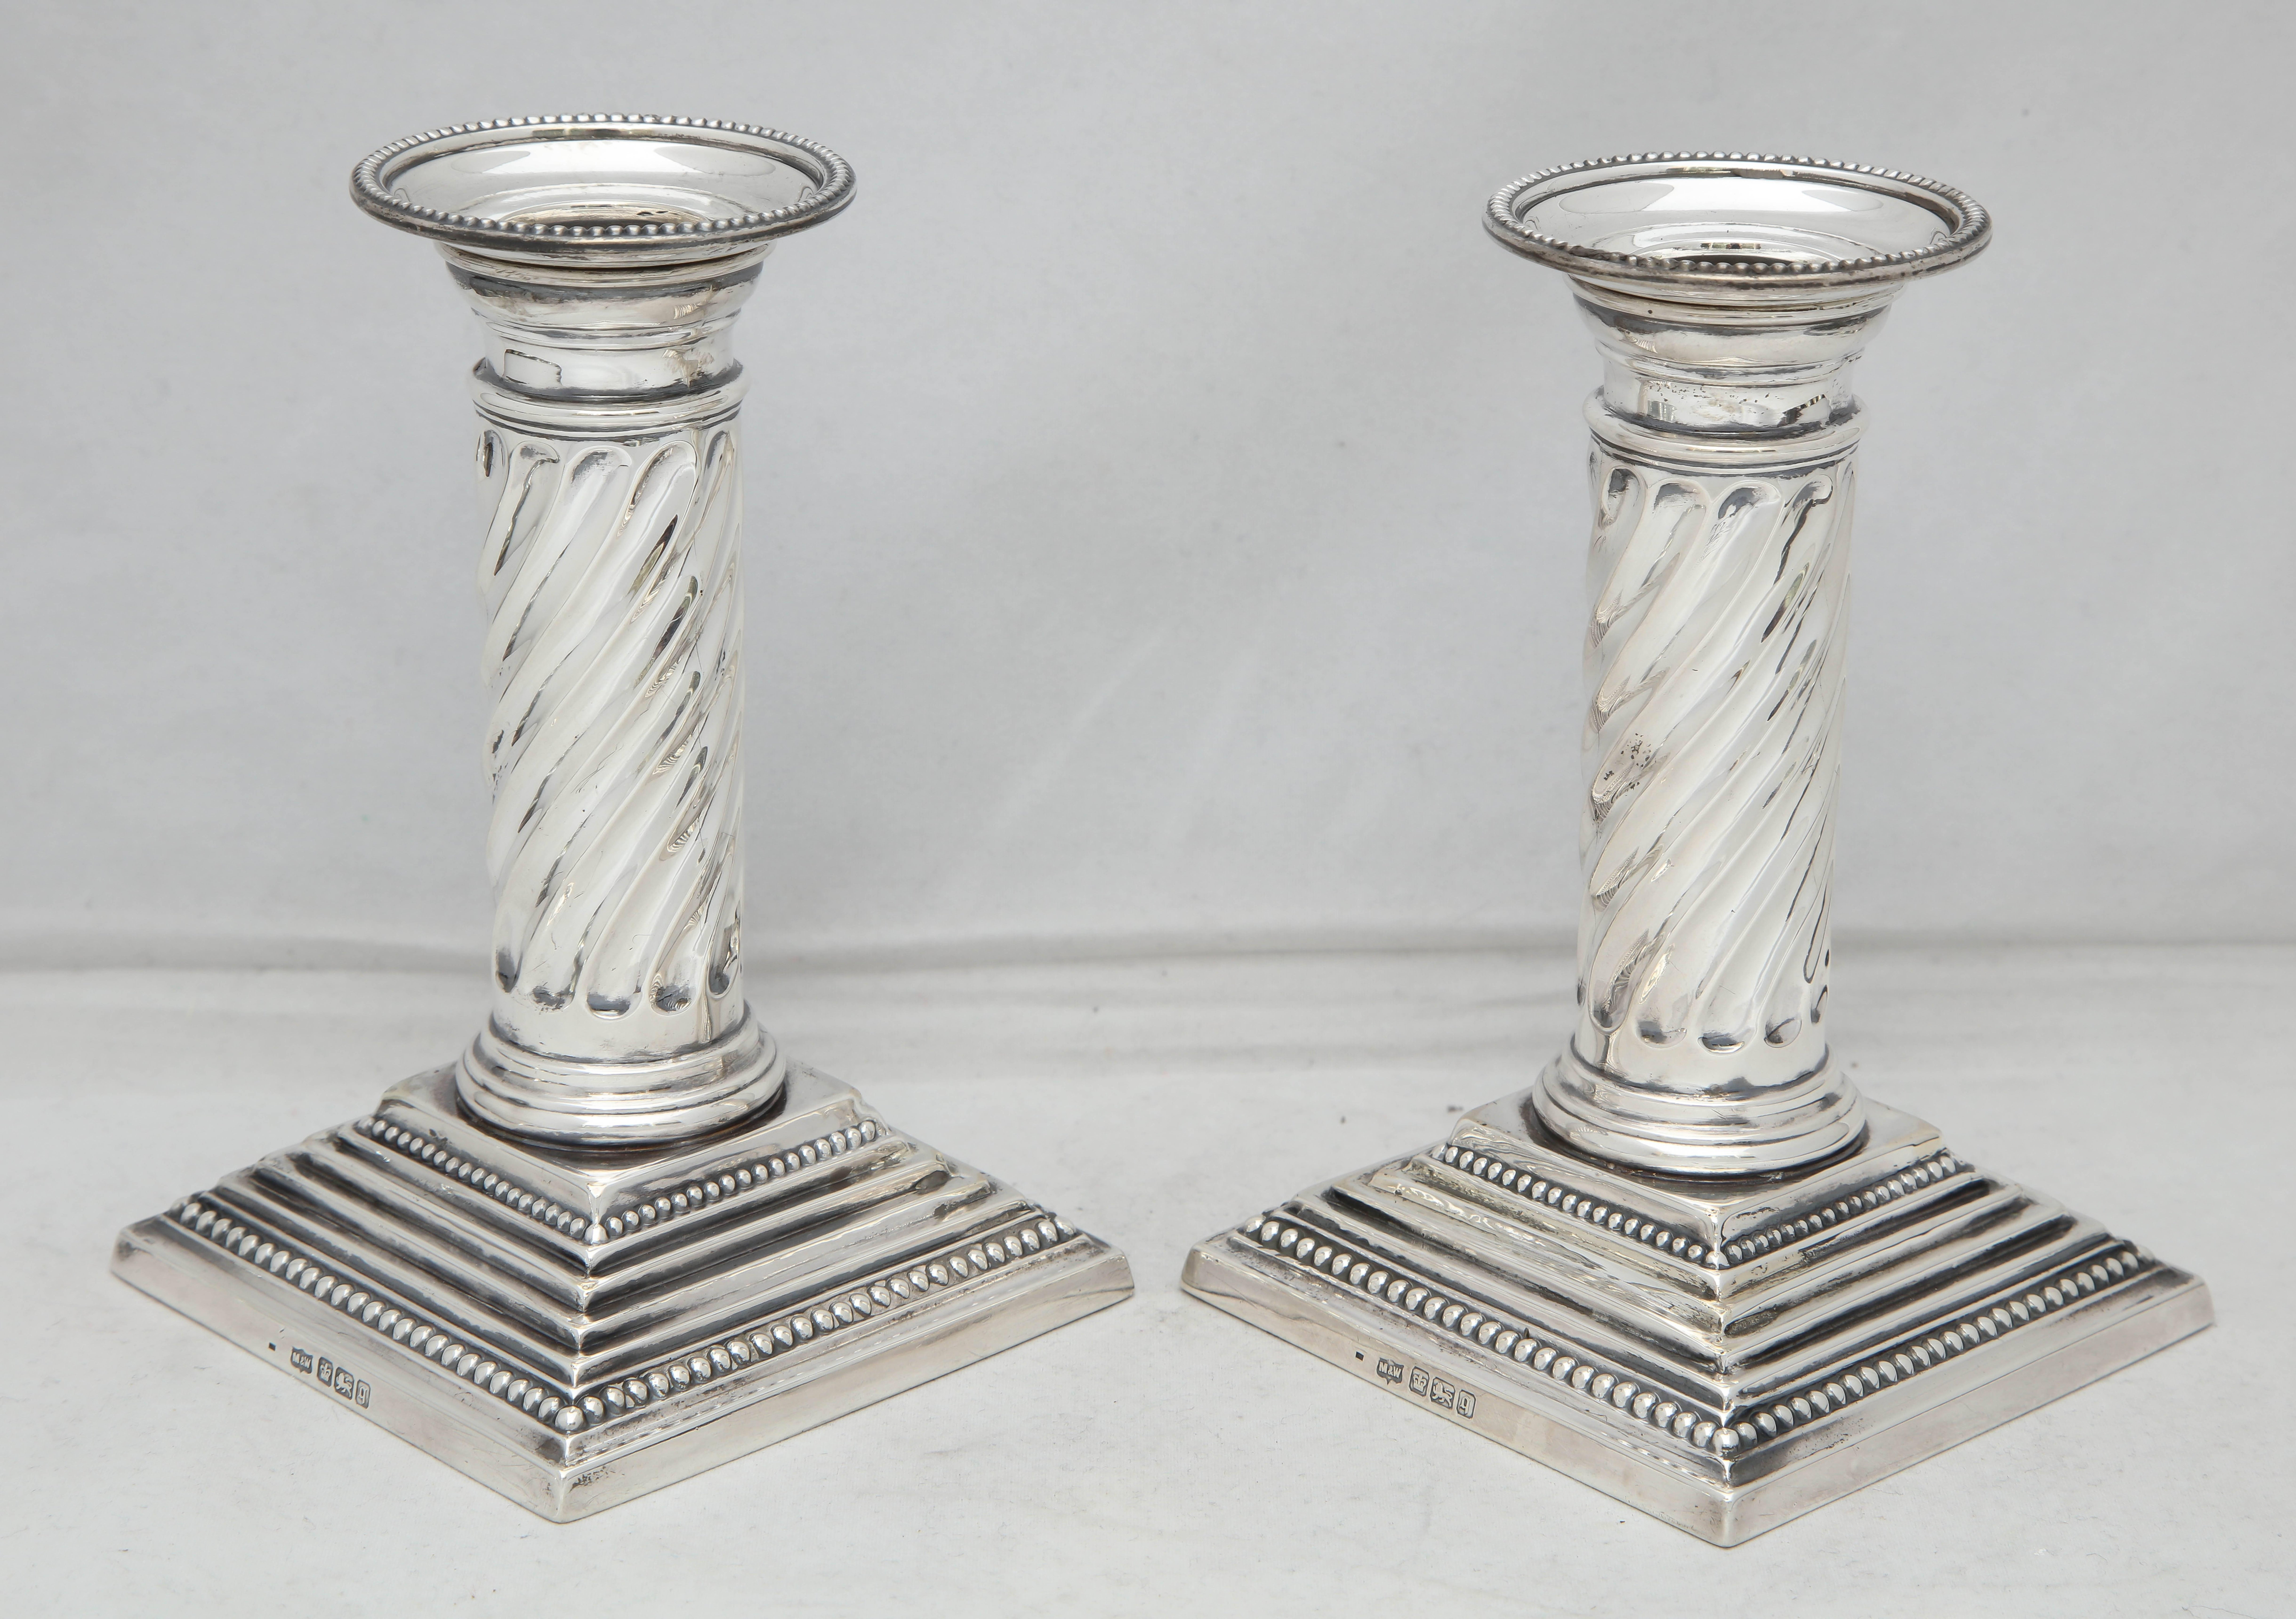 English Pair of Edwardian Neoclassical Sterling Silver Column-Form Candlesticks